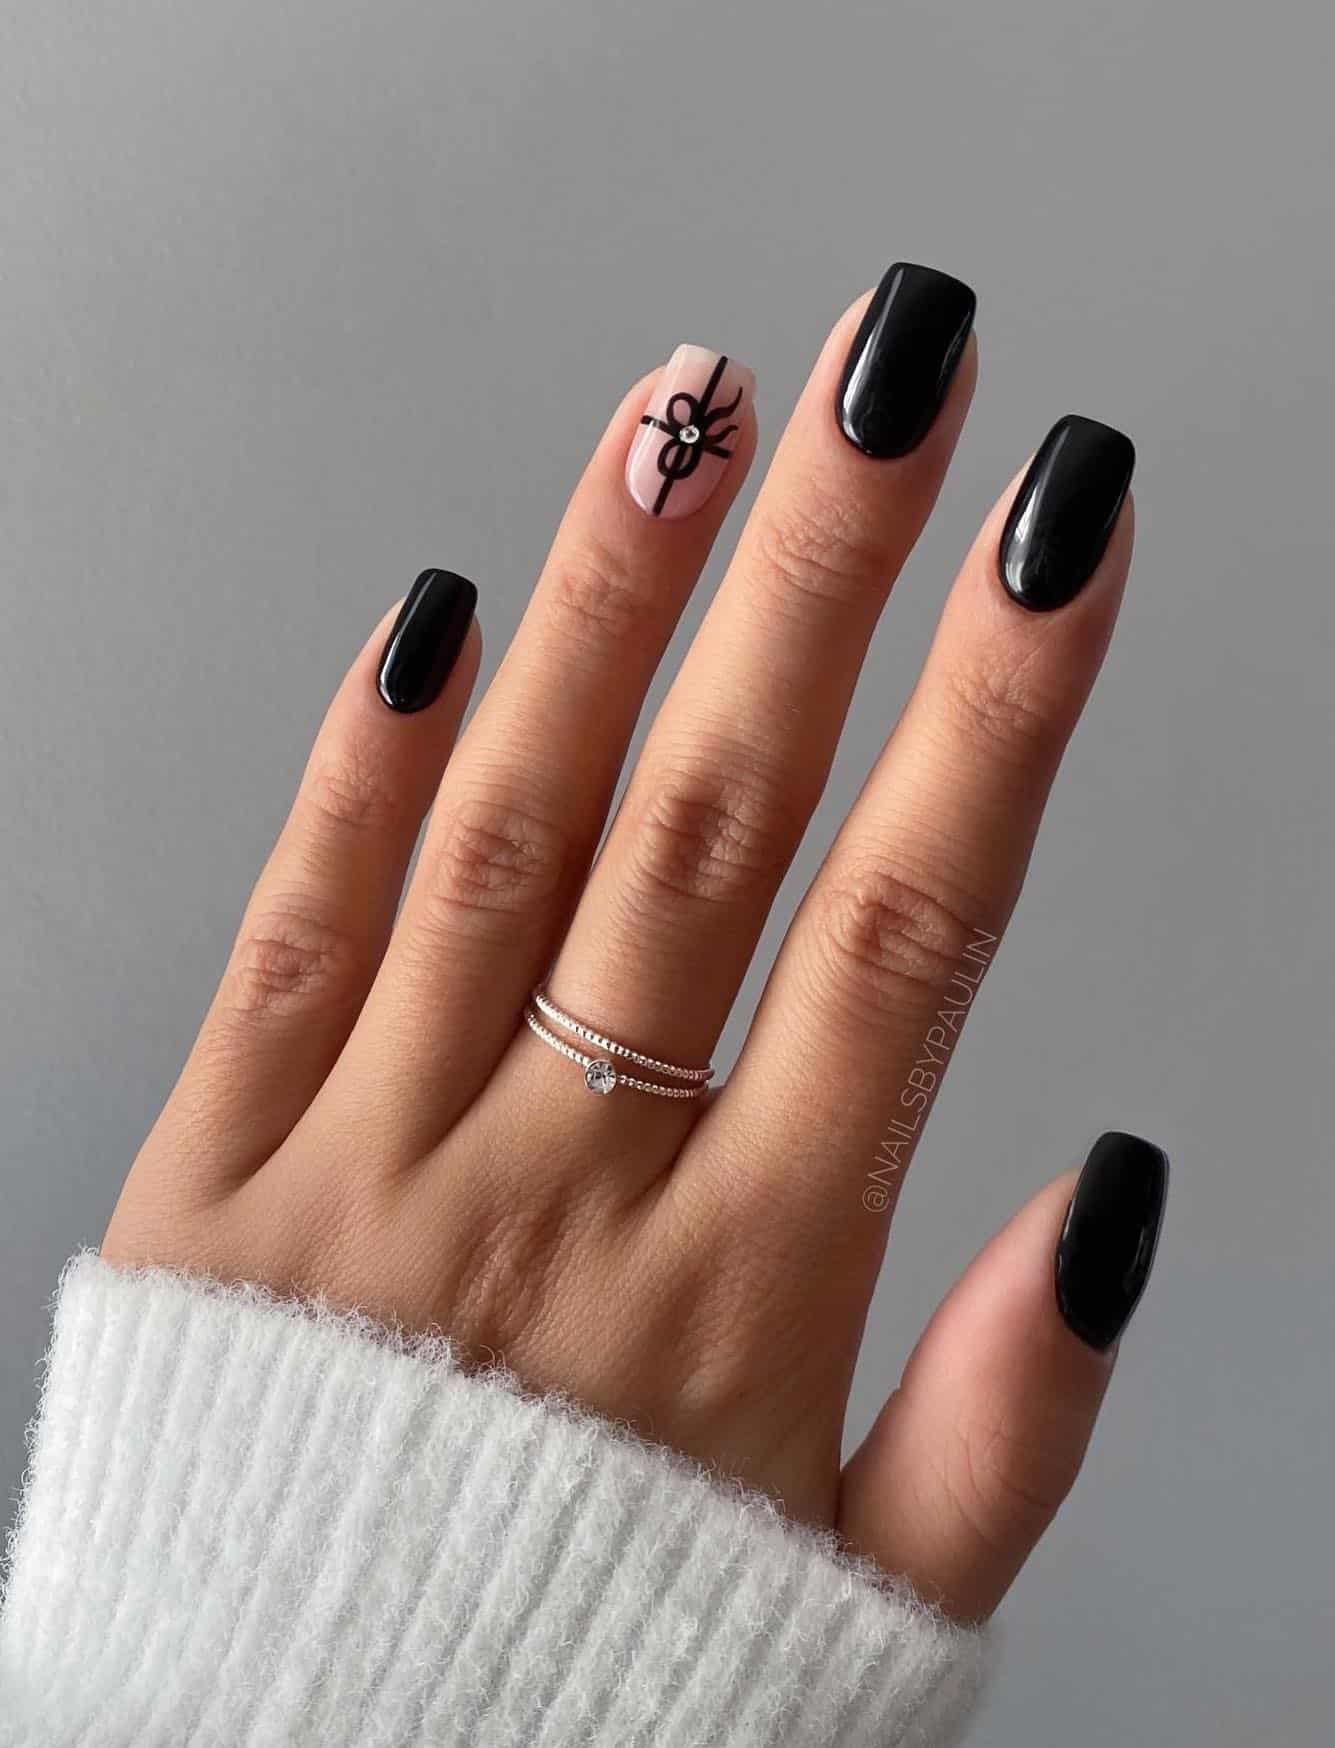 Short glossy black square nails with nude accent nail painted like a present with black ribbon and a gem detail